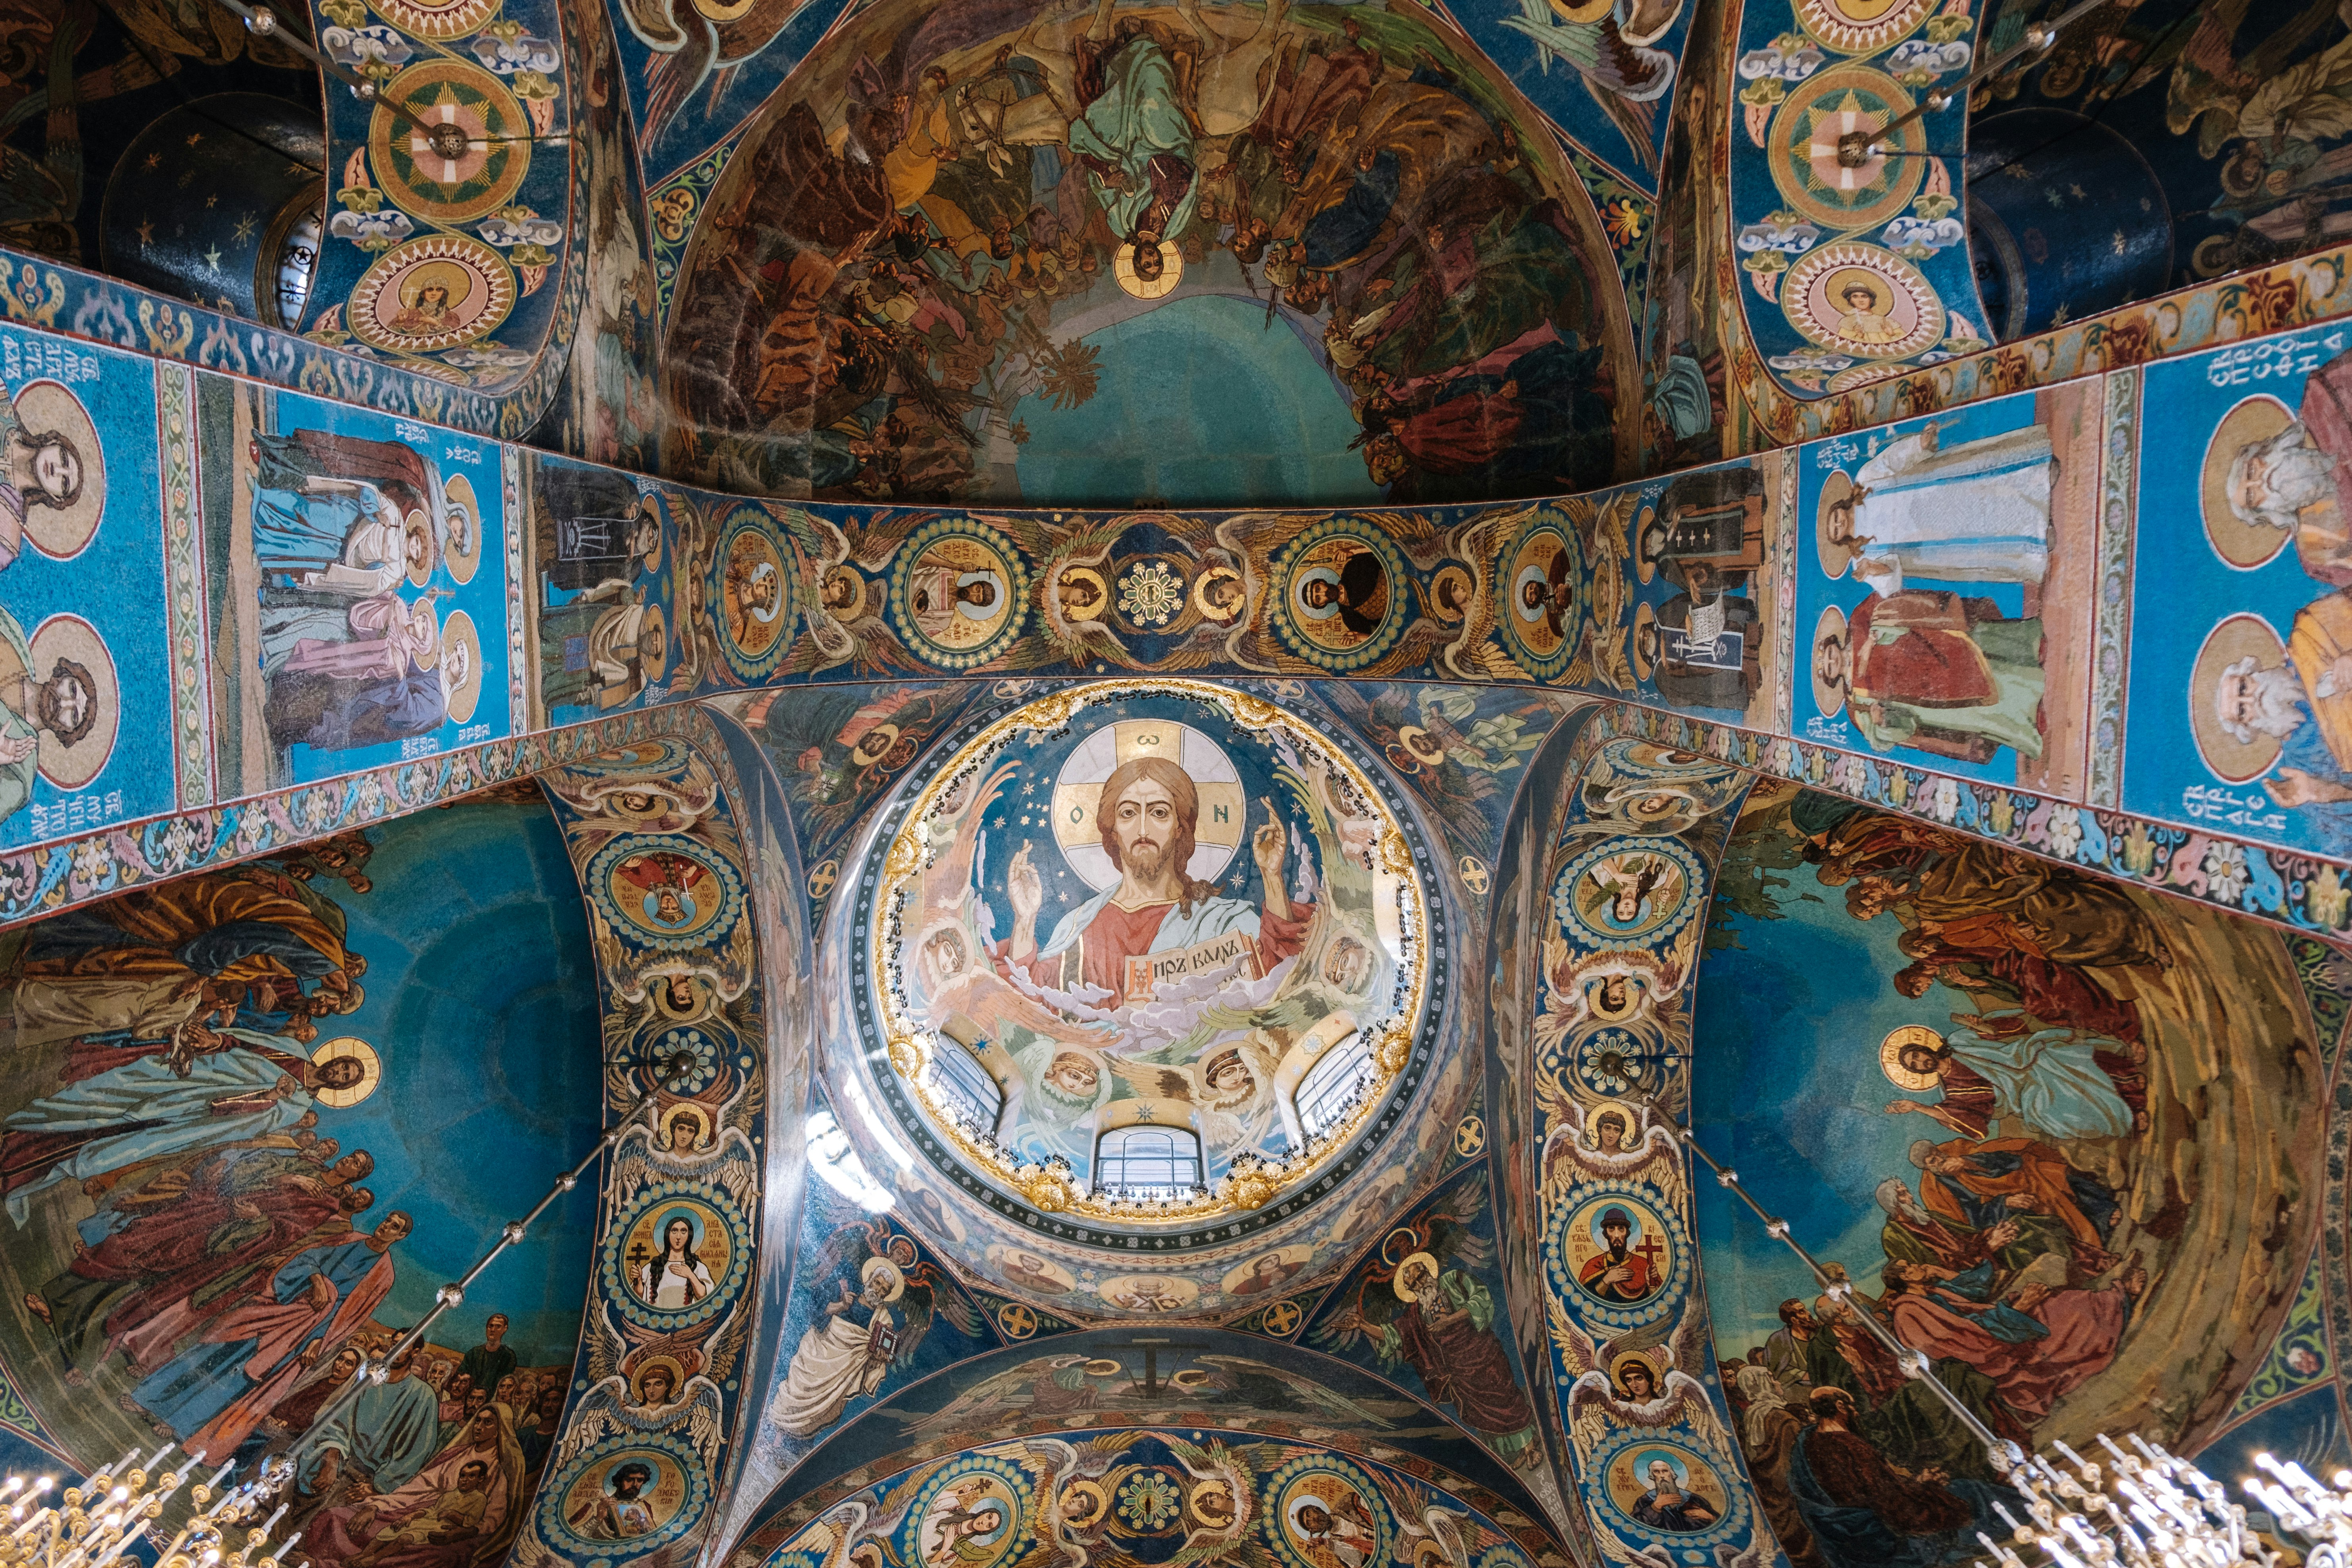 The ceiling of the Church of the Savior on Blood, Saint Petersburg, Russia.